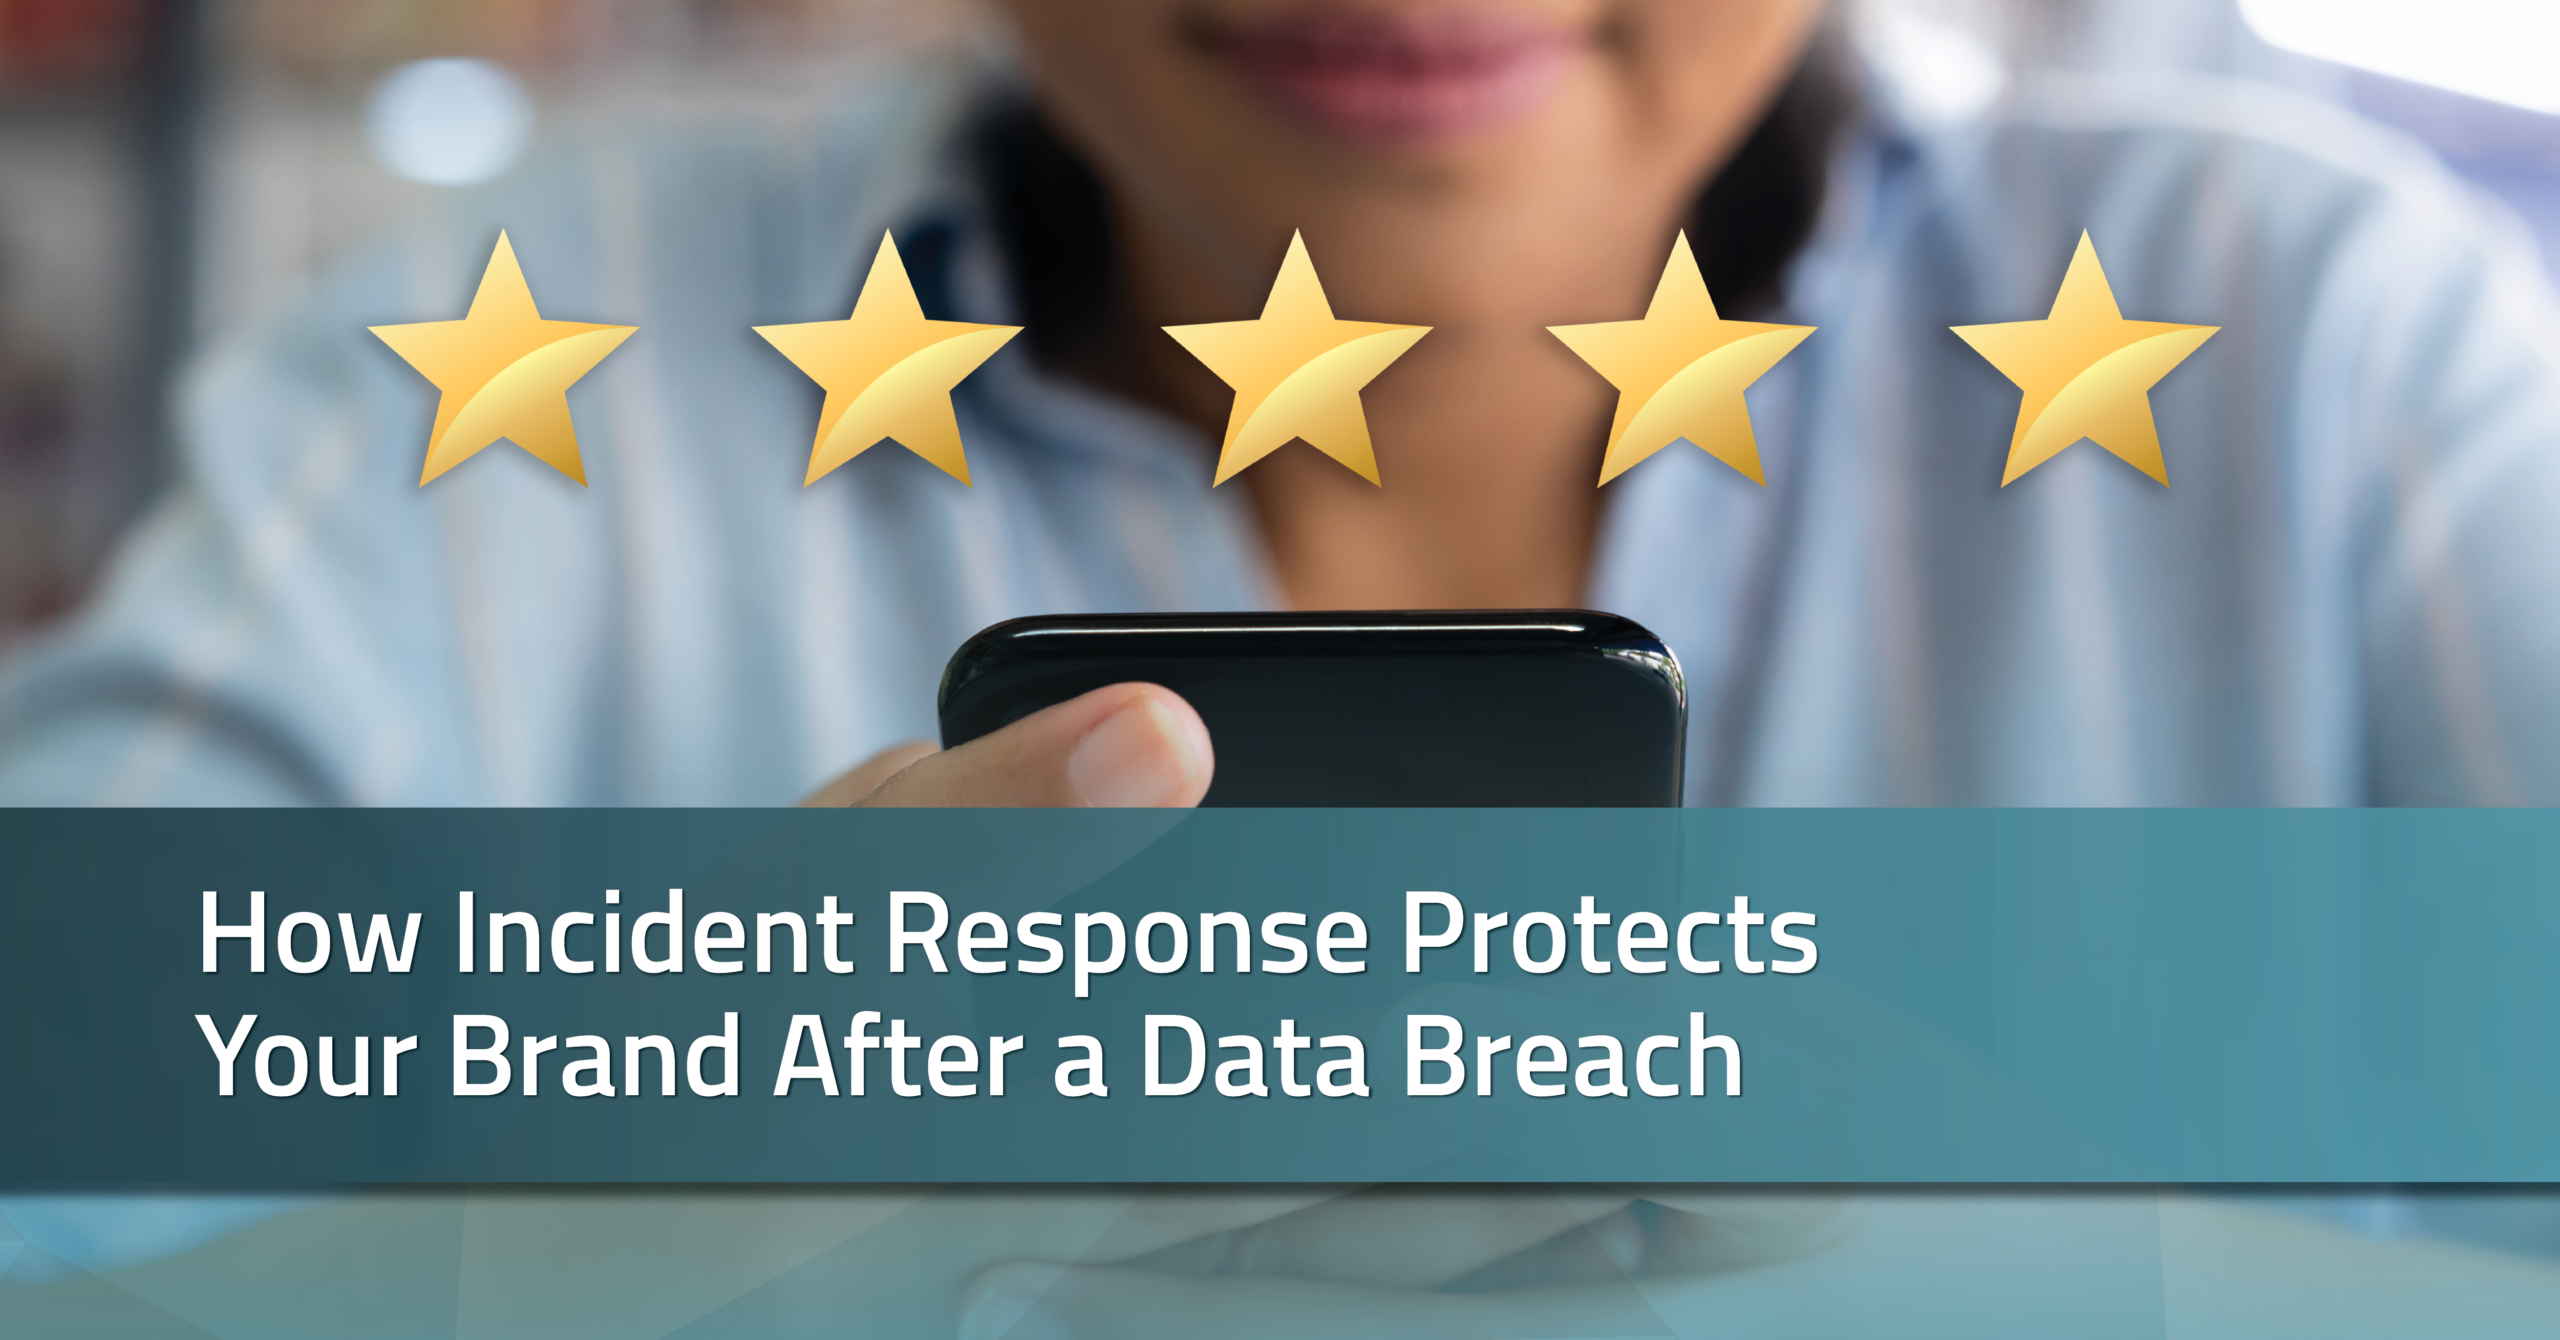 How Incident Response Protects Your Brand After a Data Breach RadarFirst